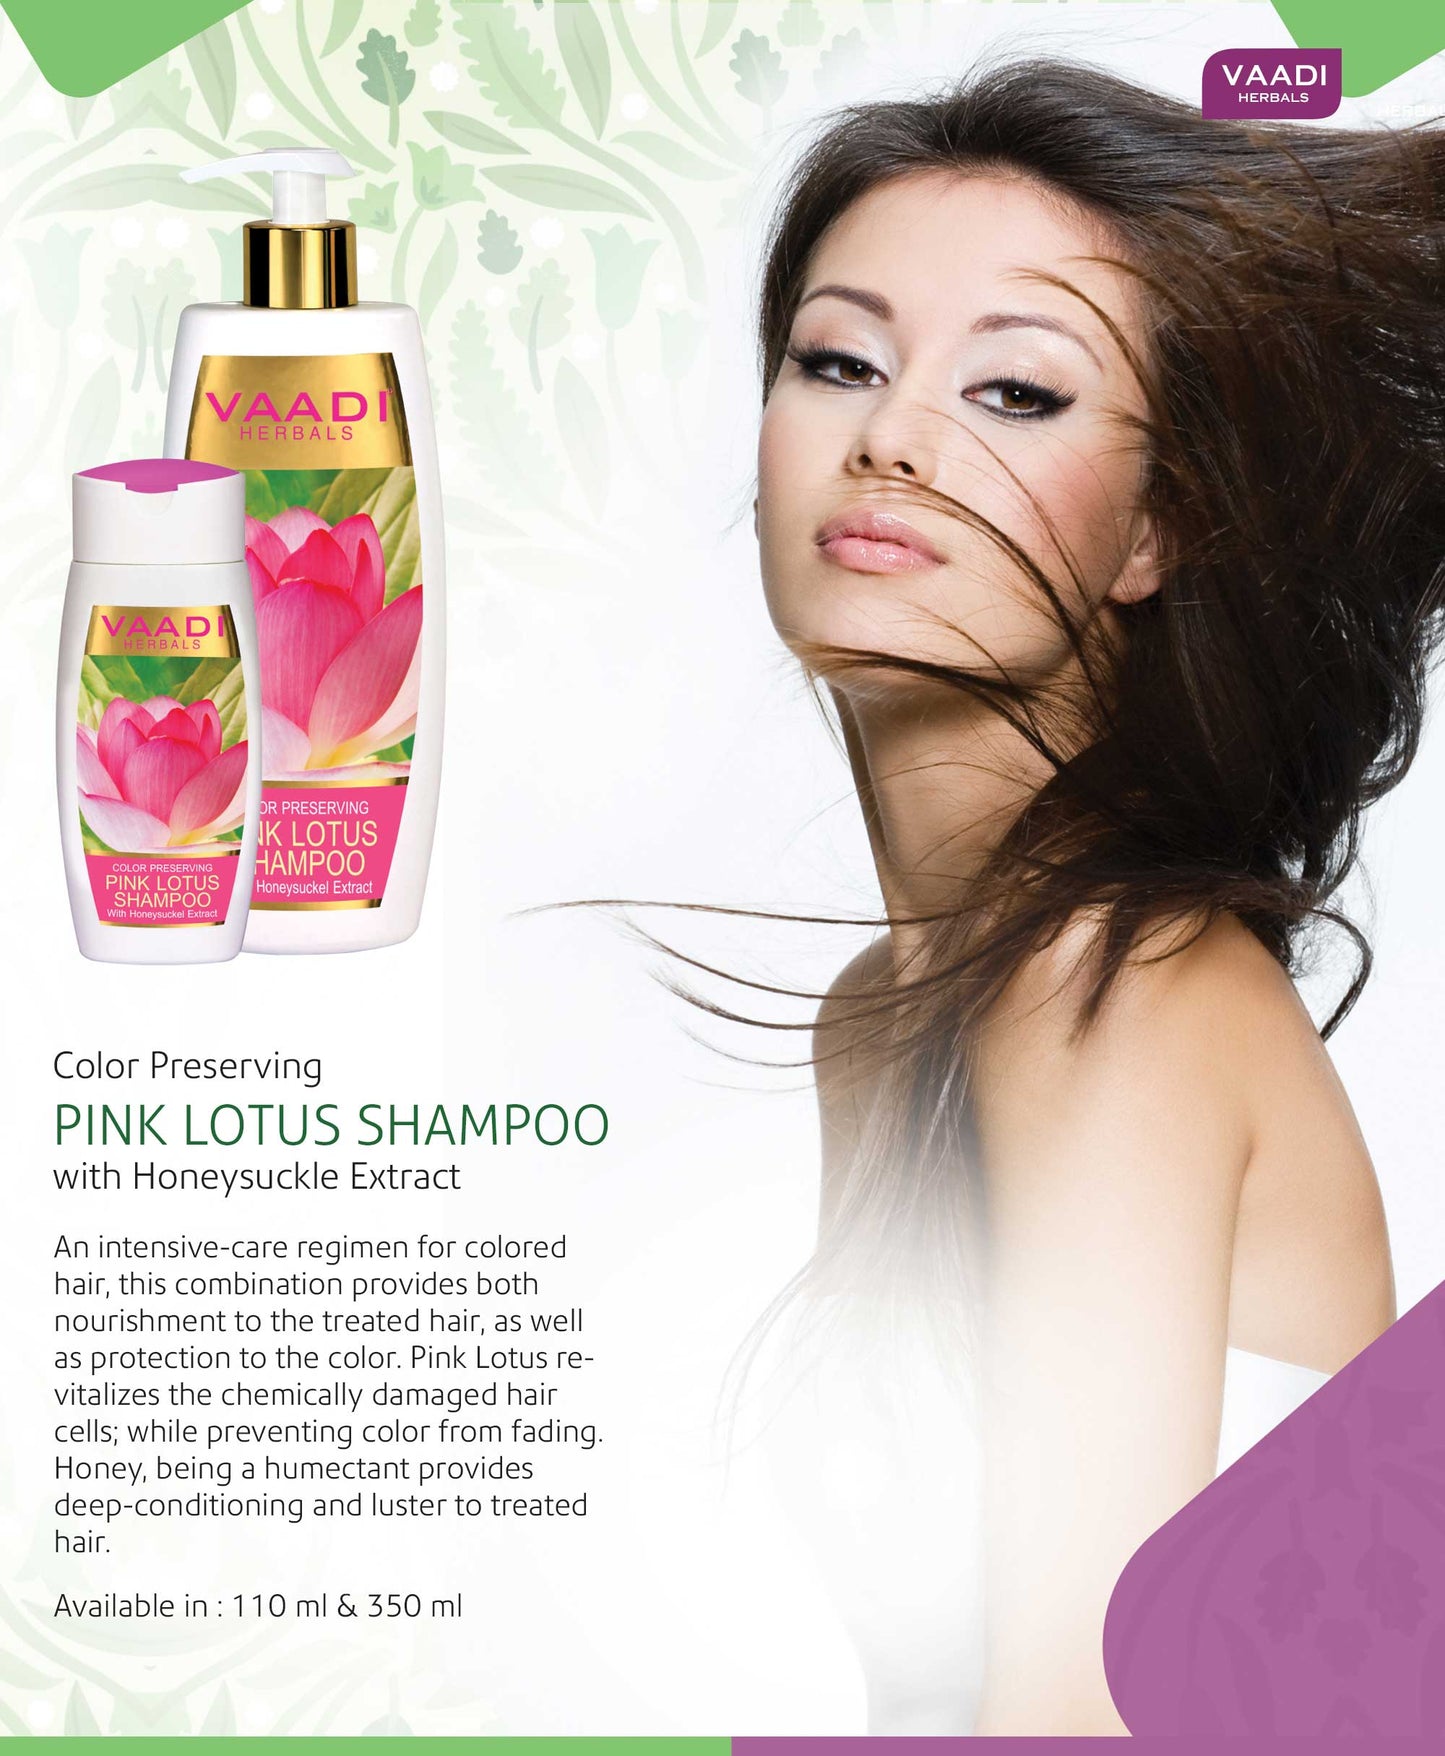 Color Preserving Organic Pink Lotus Shampoo with Honeysuckle Extract - Nourishes Treated Hair - Moisturizes Hair (110ml / 4 fl oz)